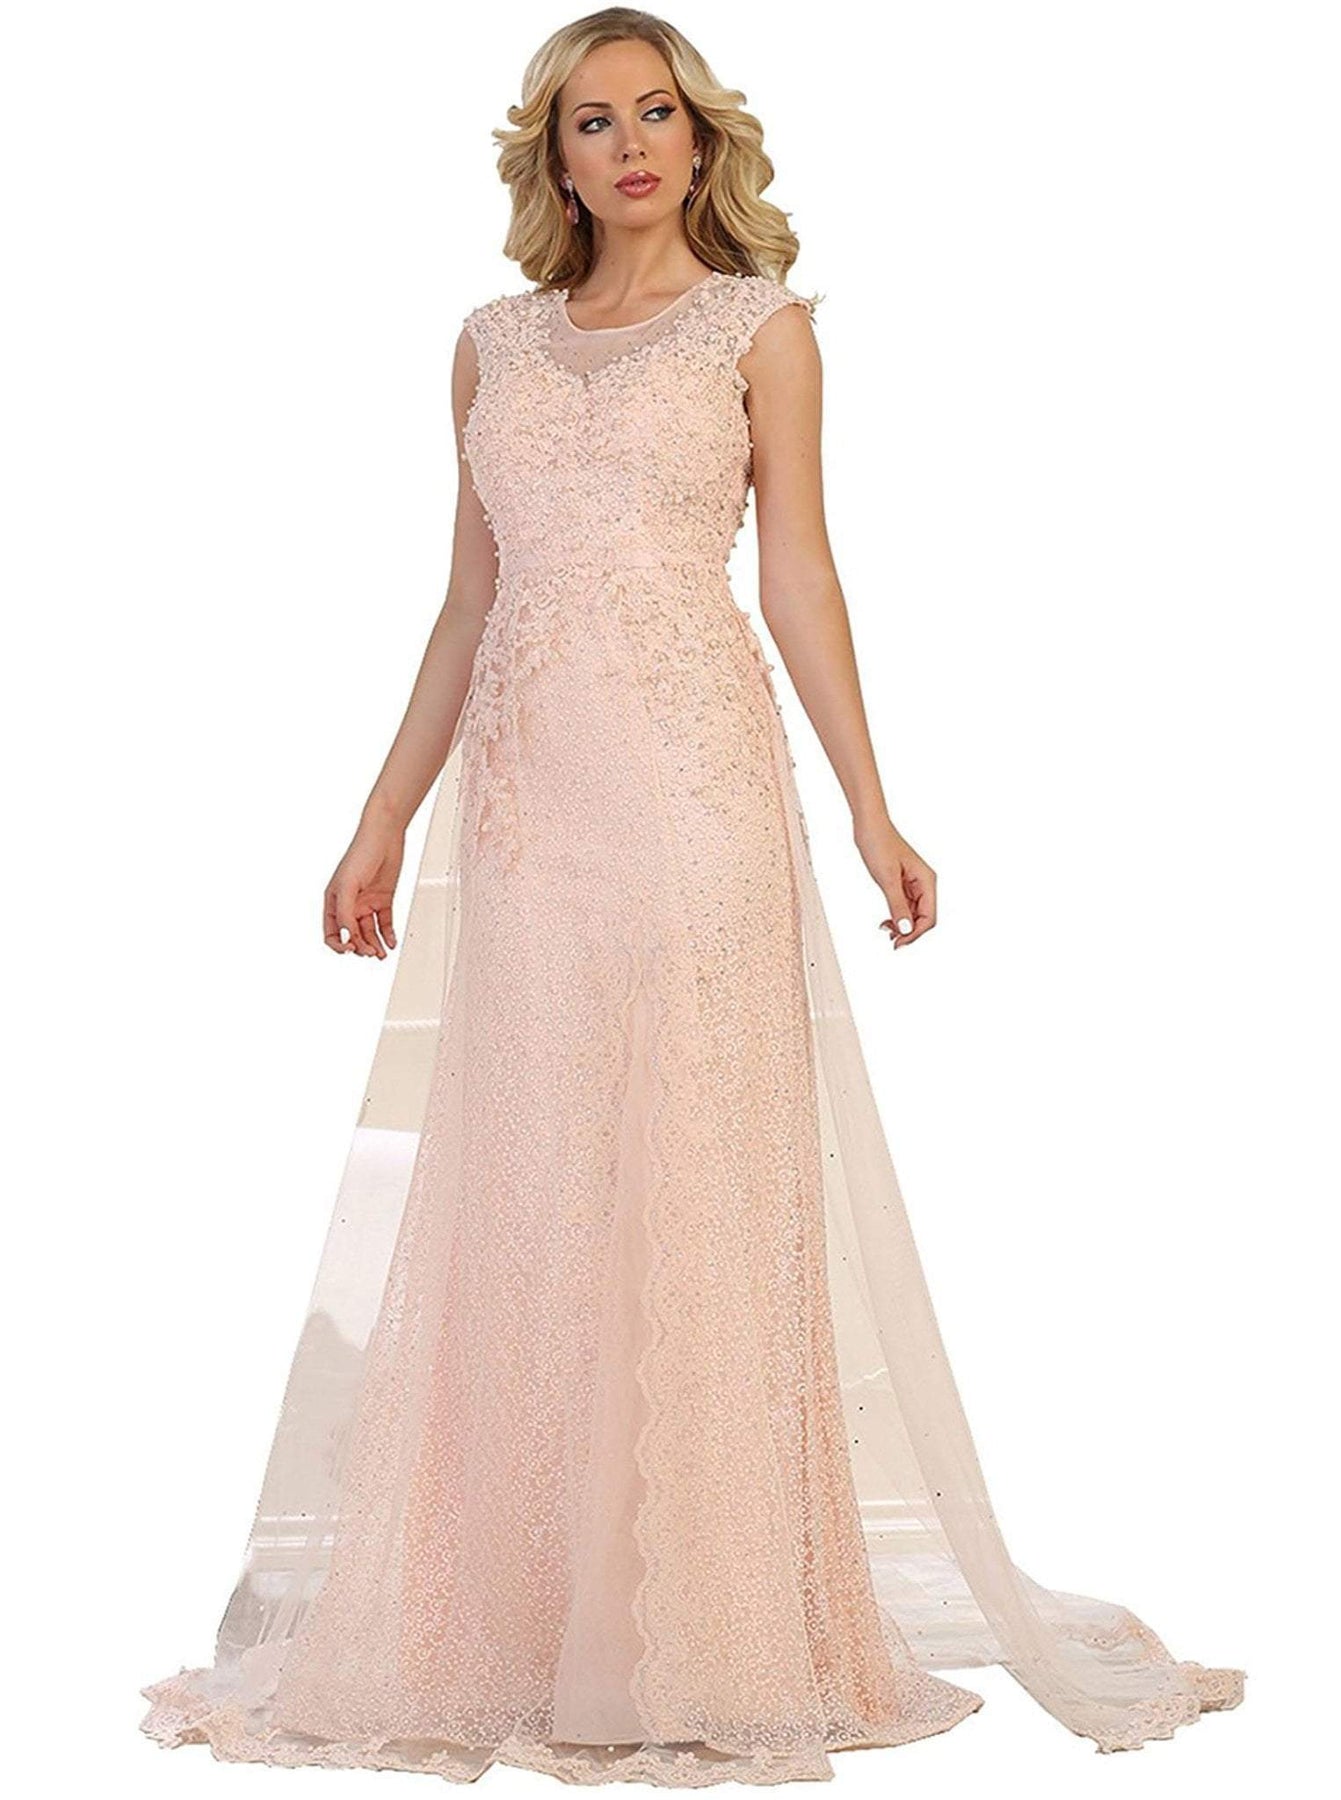 May Queen - RQ7556 Embellished Illusion Jewel Fitted Evening Gown Special Occasion Dress 4 / Blush